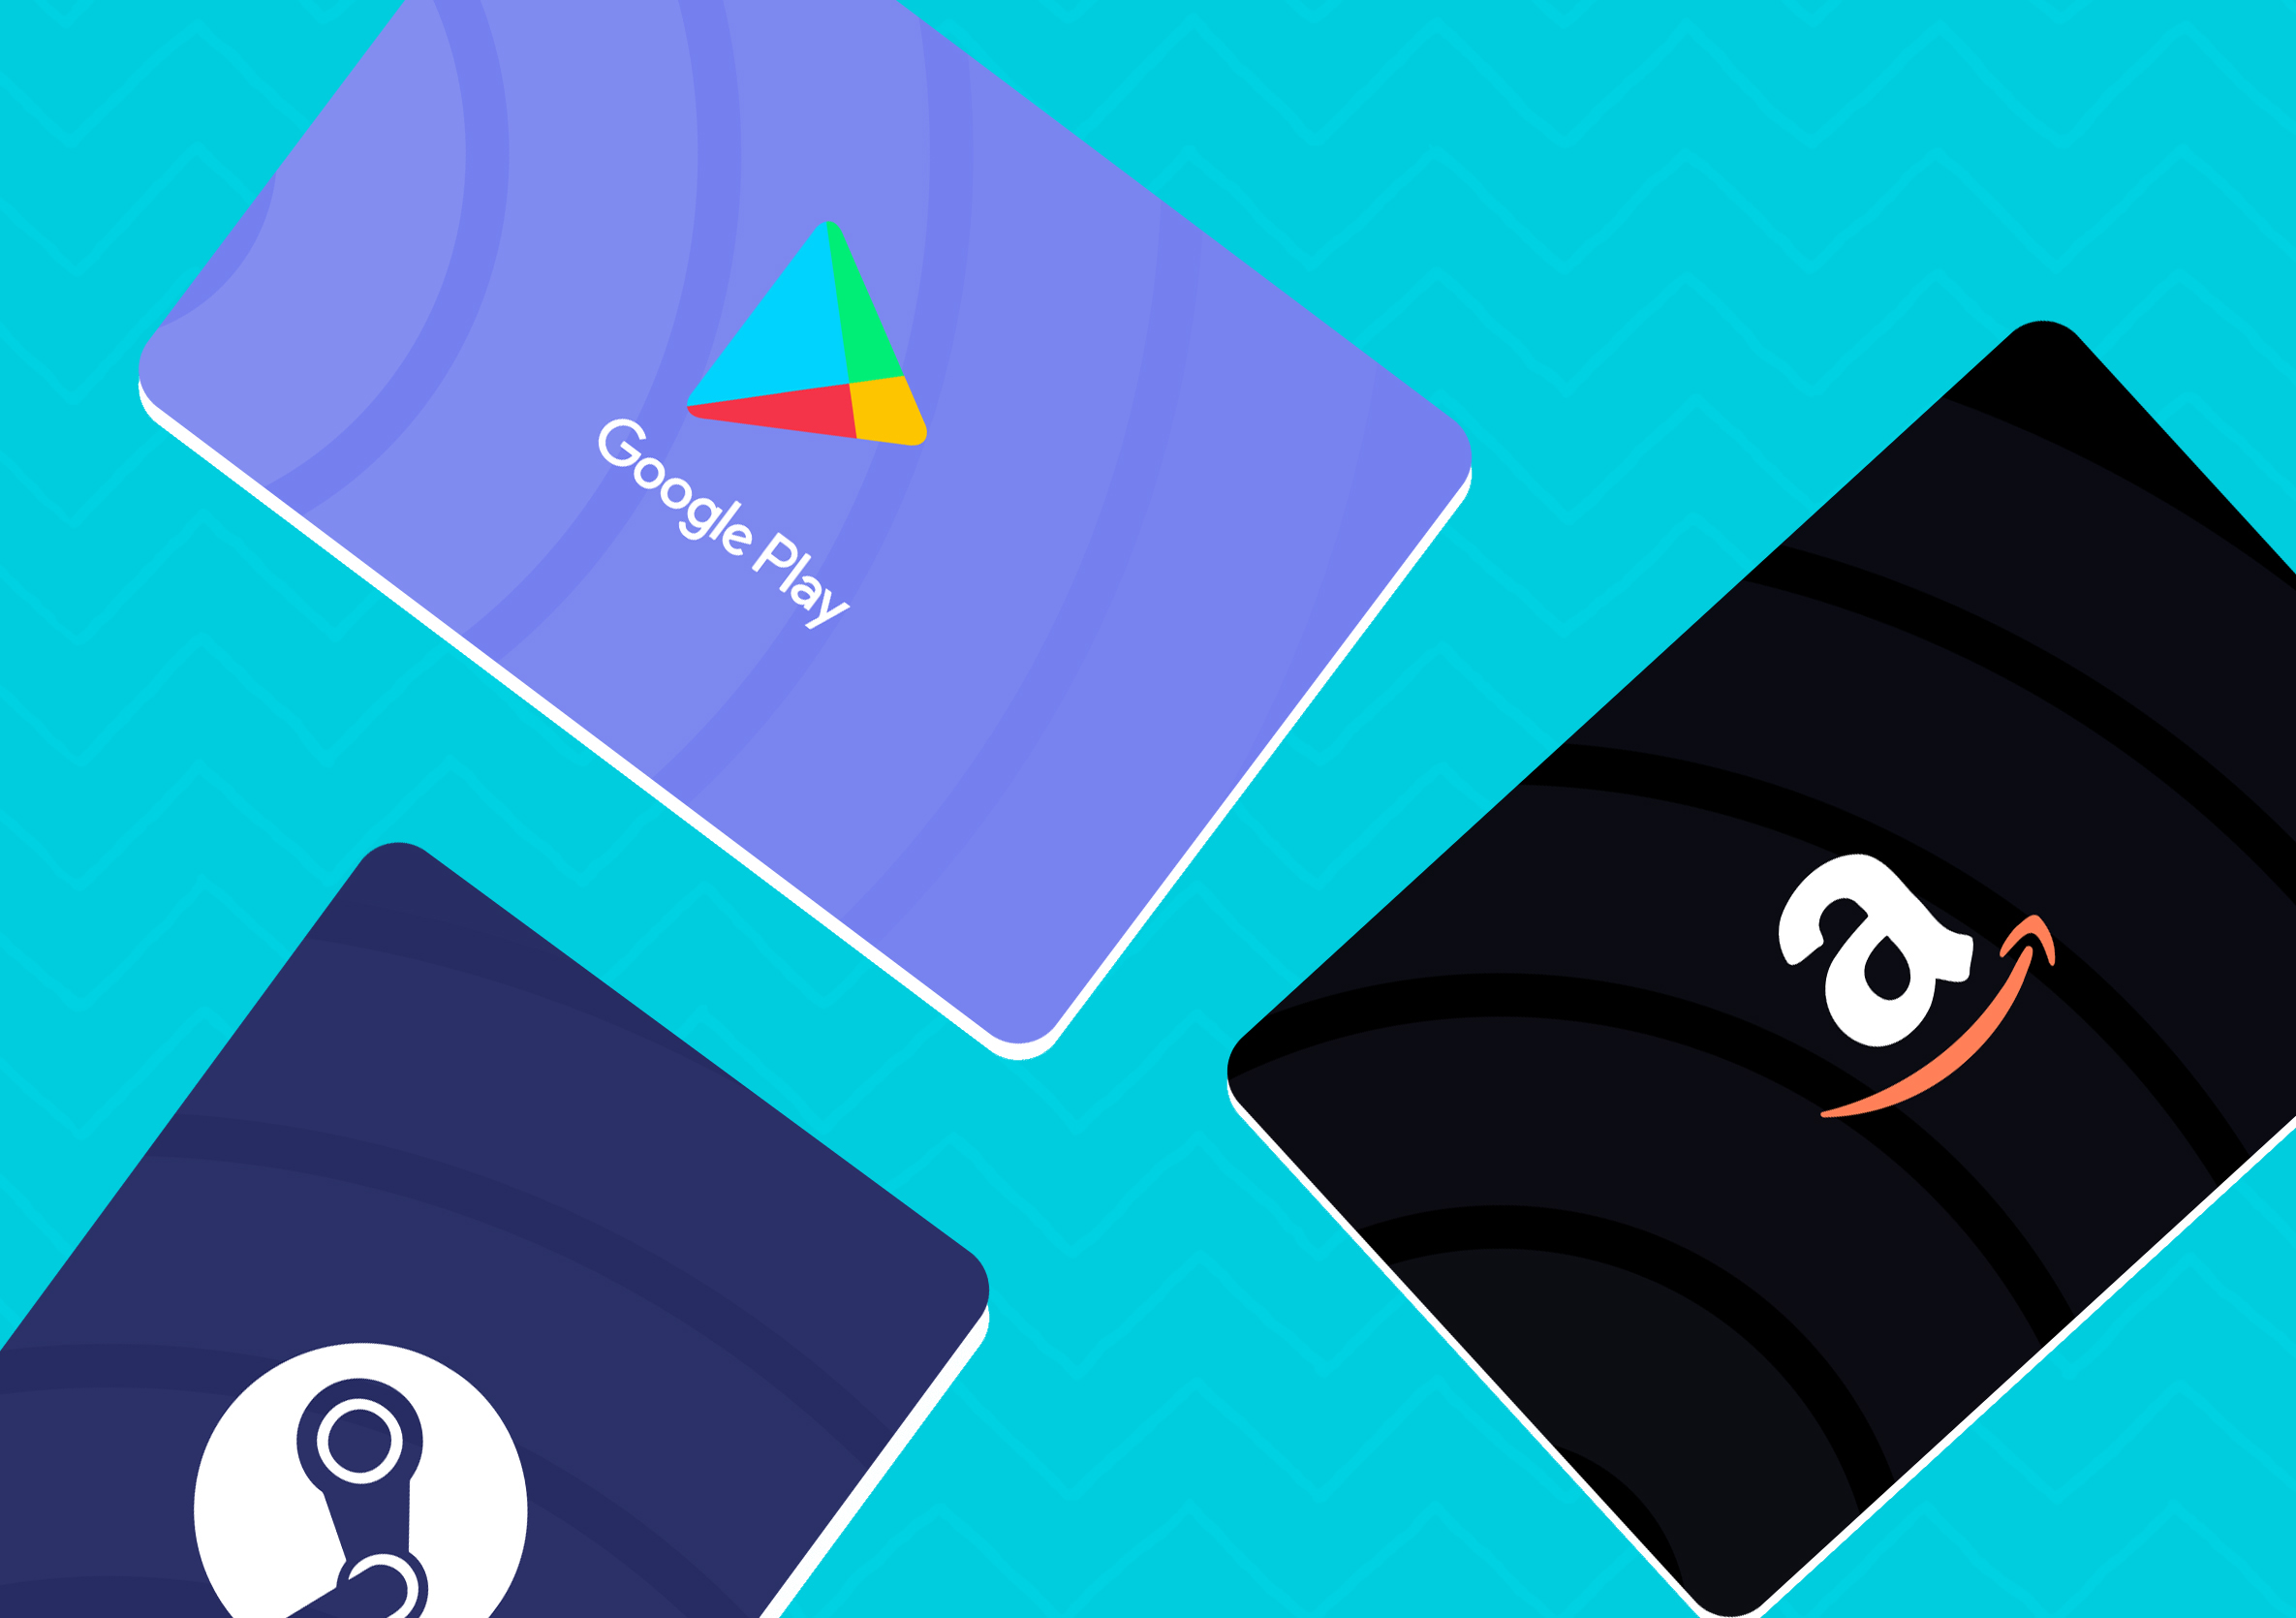 5. All to know about  gift card